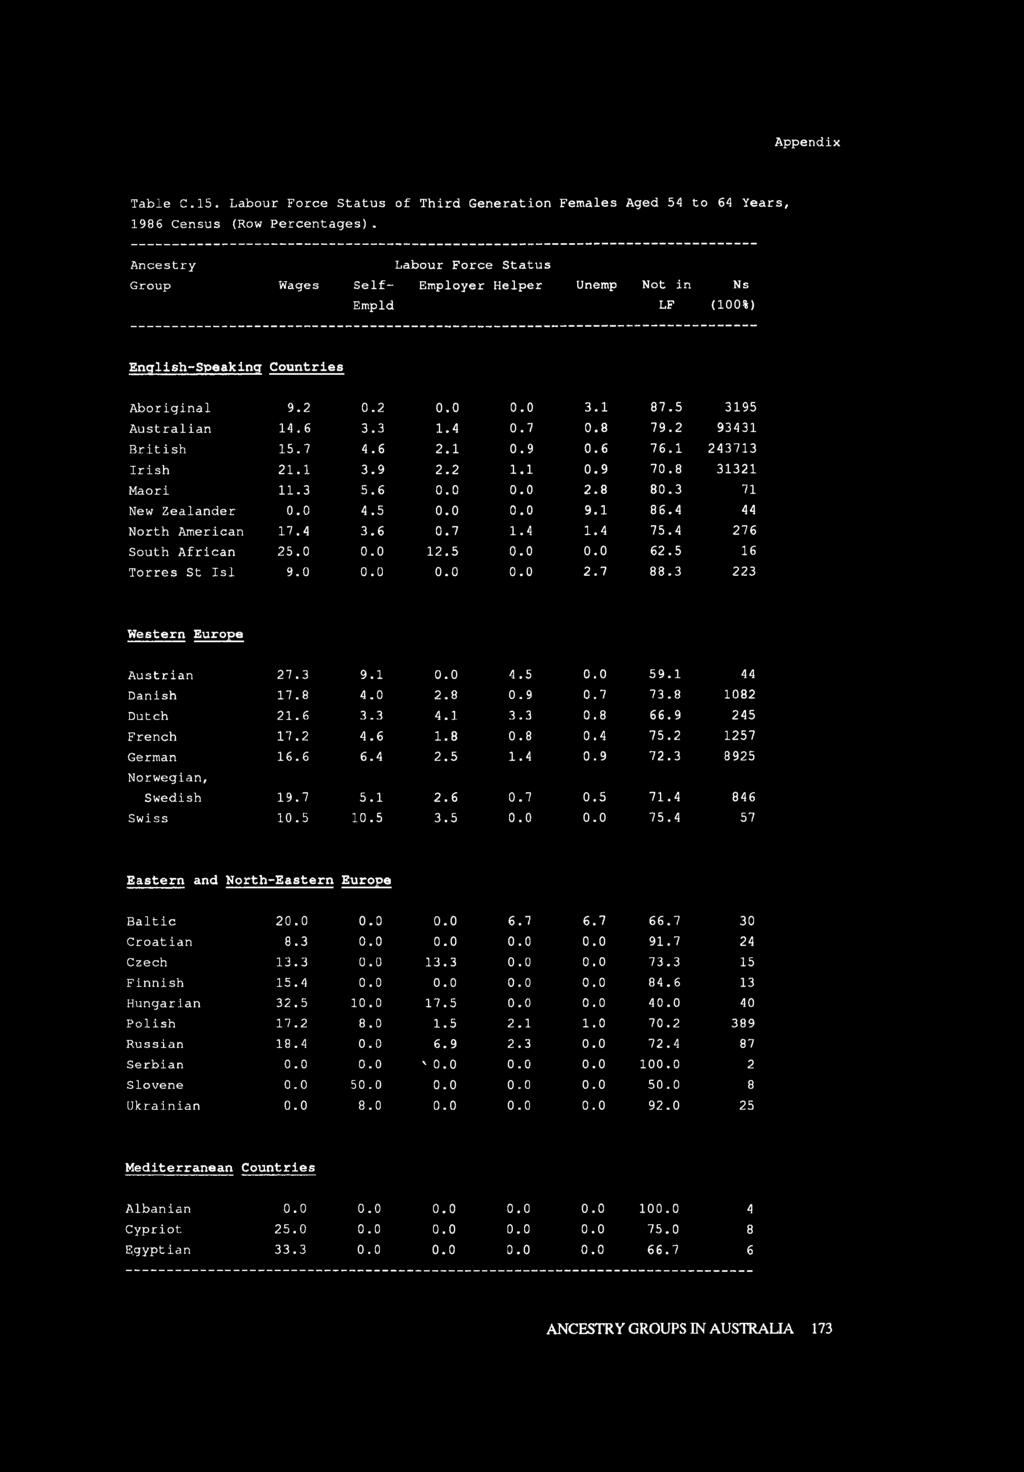 Appendix Table C.15. Labour Force Status of Third Generation Females Aged 54 to 64 Years, 1986 Census (Row Percentages).